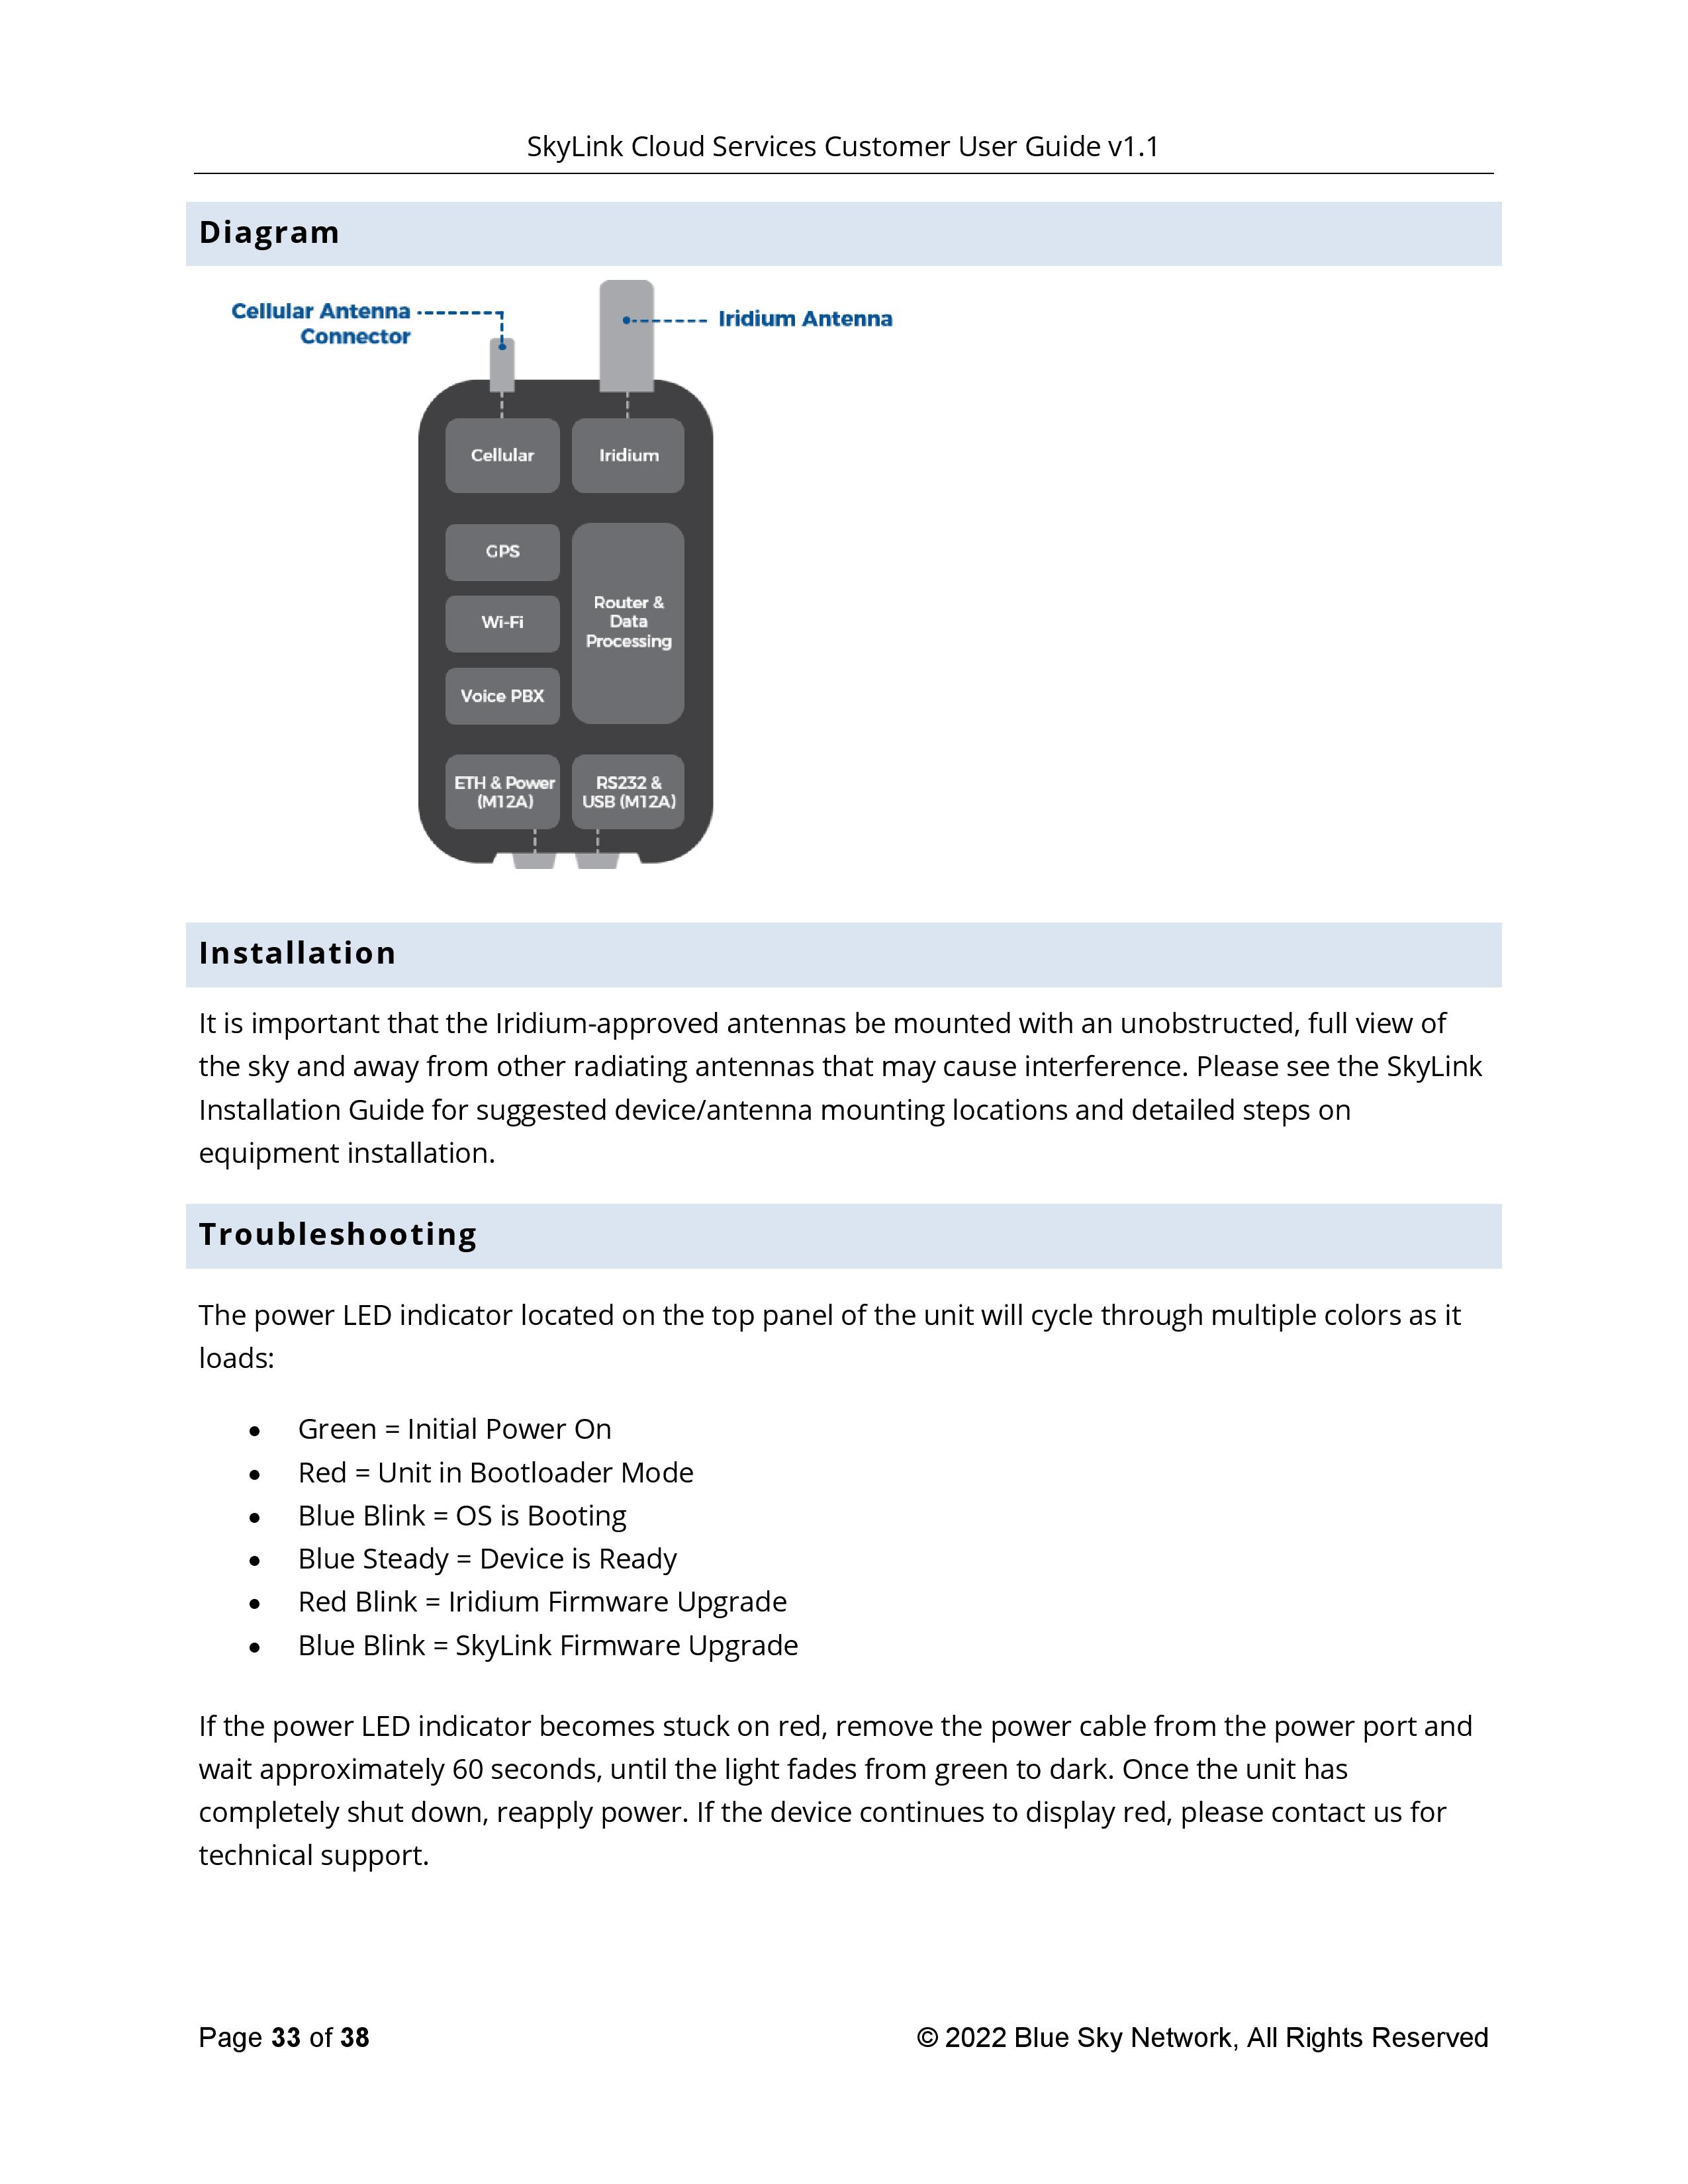 SkyLink-Cloud-Services-Customer-User-Guide-page-033.jpg